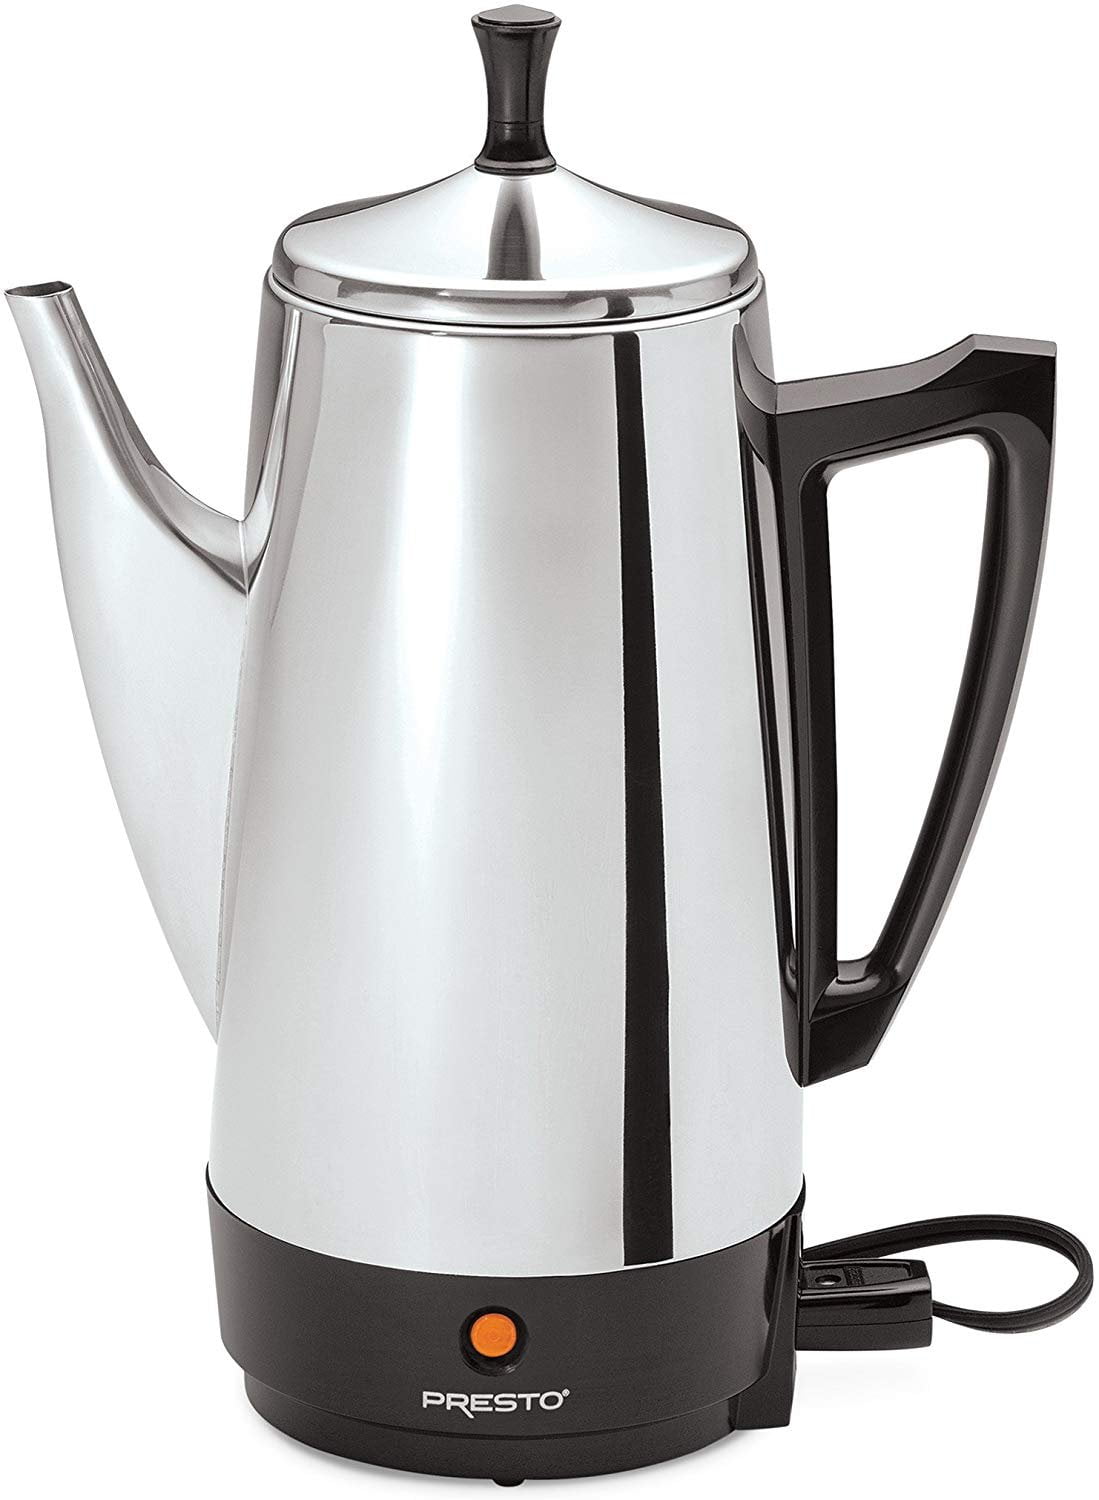 SENSEMAKE 12 Cup Electric Percolator Coffee Maker, Stainless Steel, Quick  Brew, Vintage Spout 110V/220V